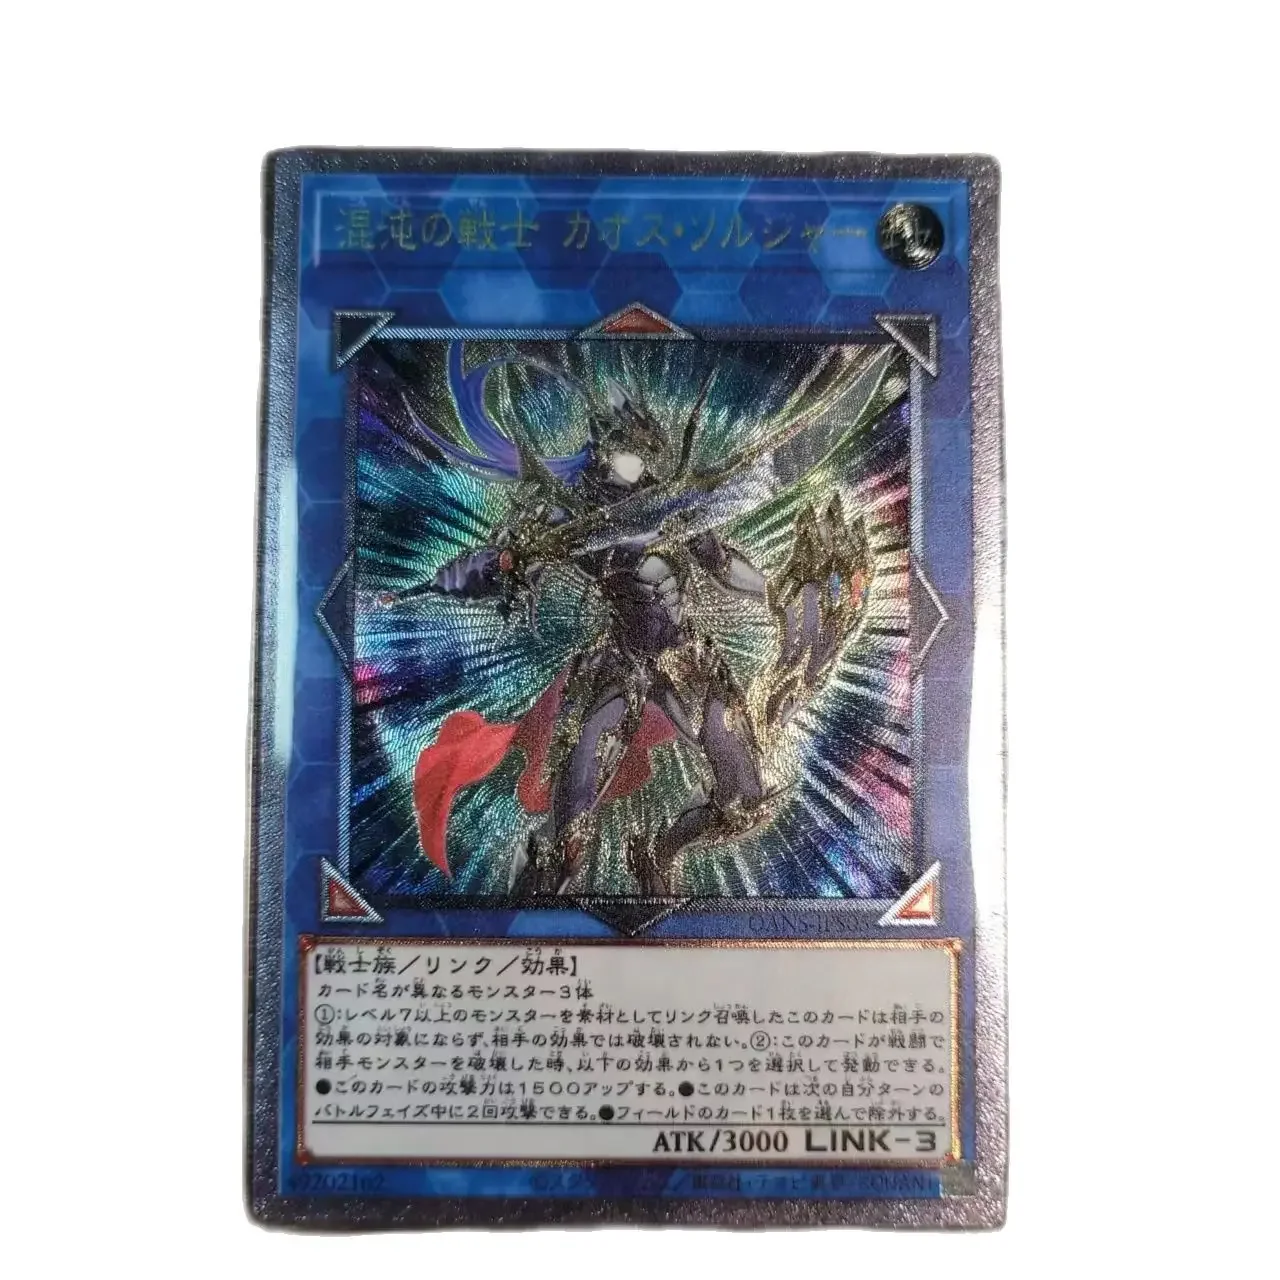 

Yu Gi Oh Ultimate Rare OANS-JPS05/ Black Luster Soldier - Soldier of Chaos Children's Gift Collection Card Toy (not original)